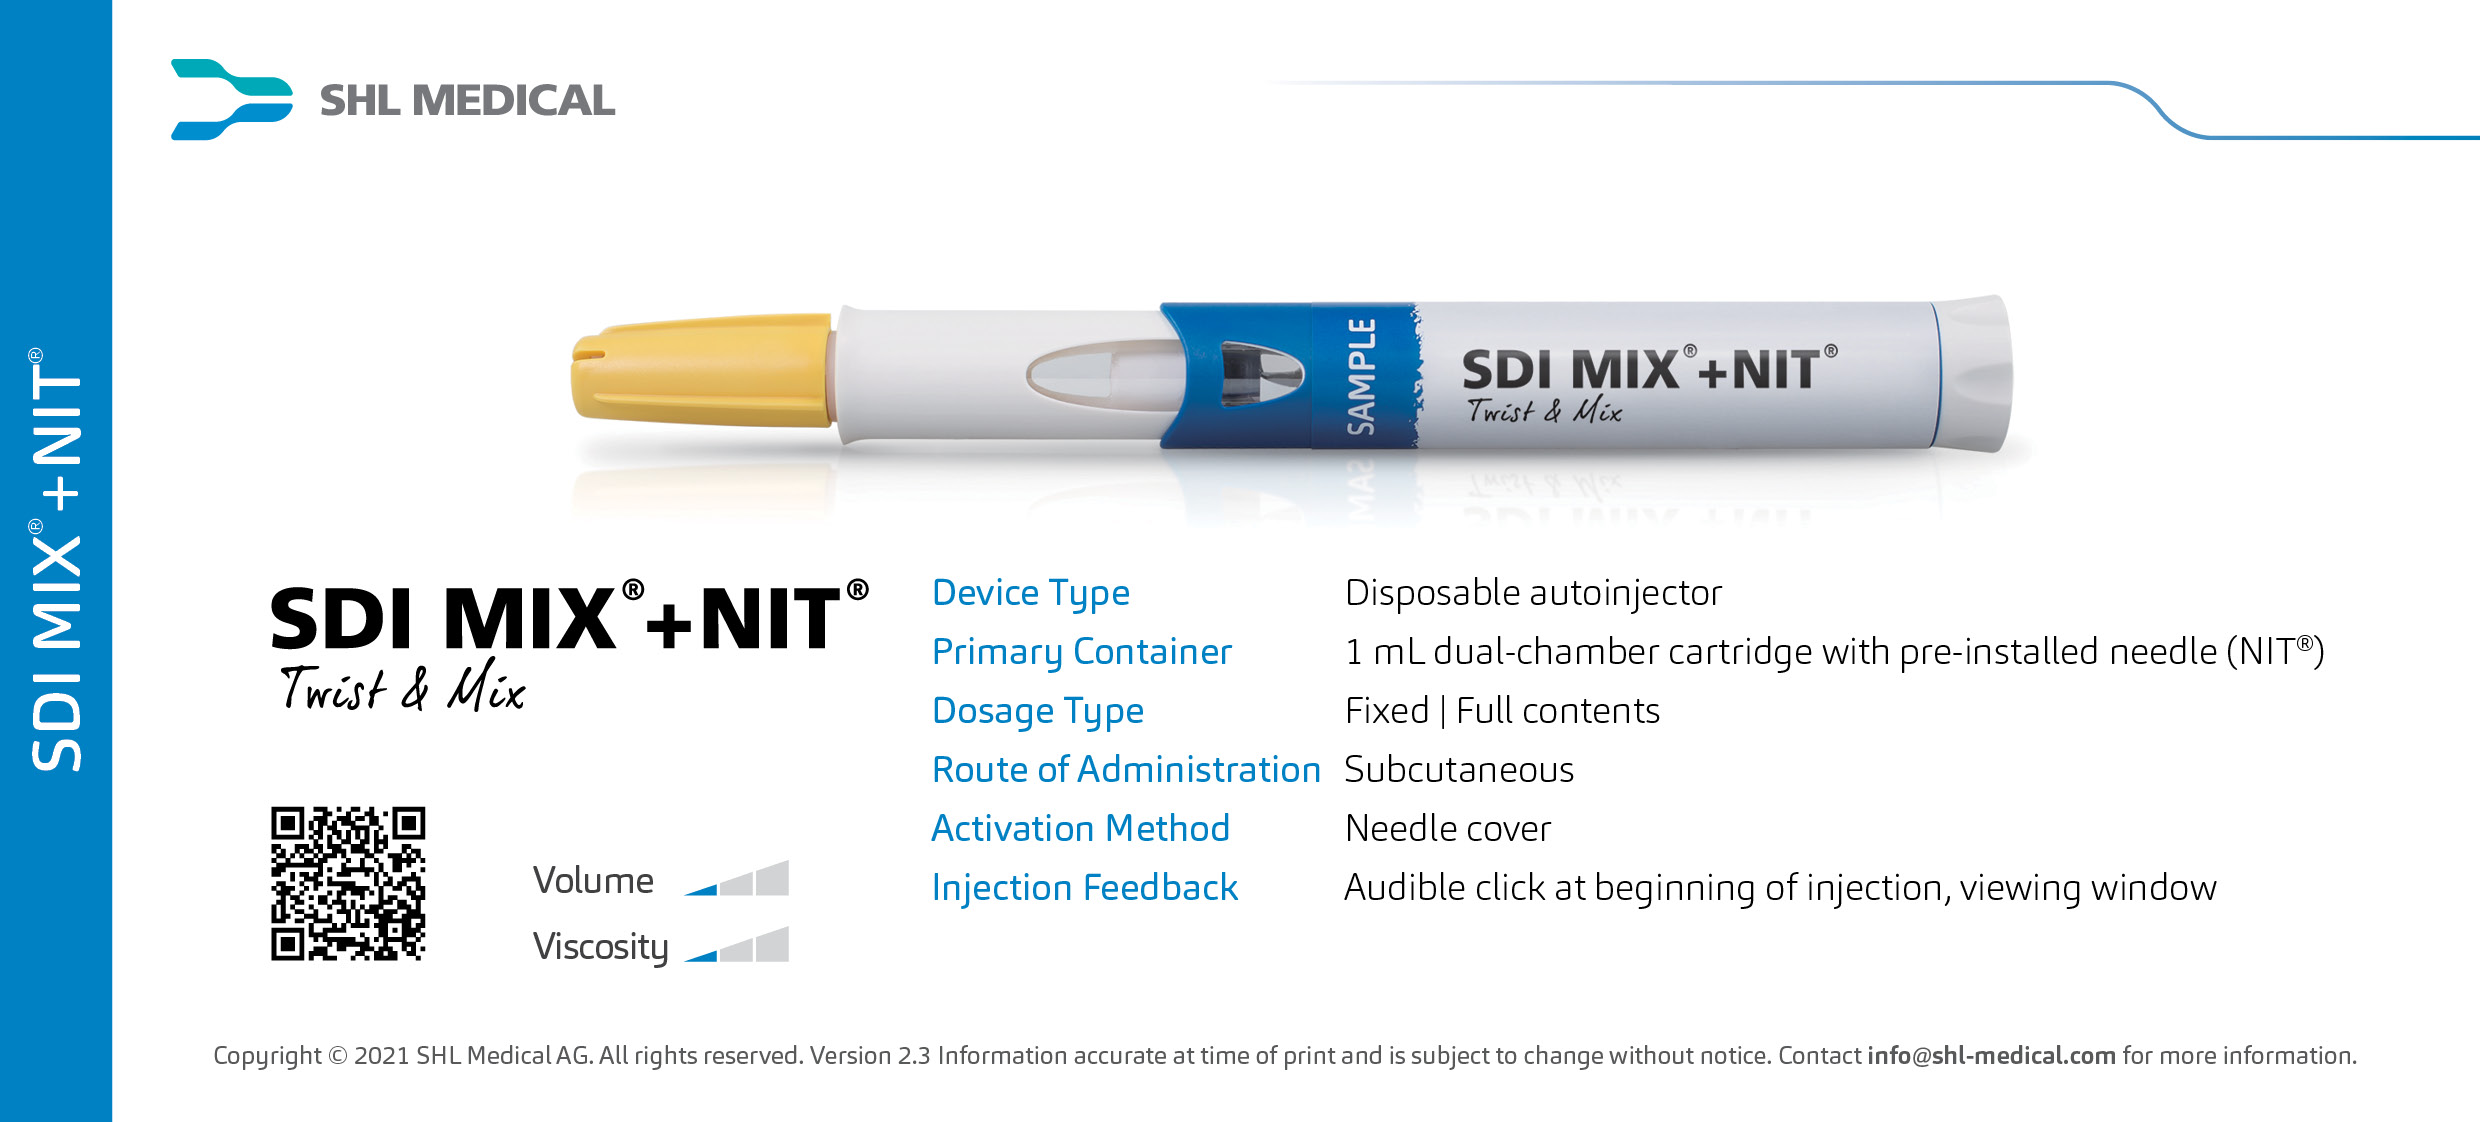 Image of SDI MIX+NIT autoinjector developed by SHL Medical along with its specifications and handling instruction